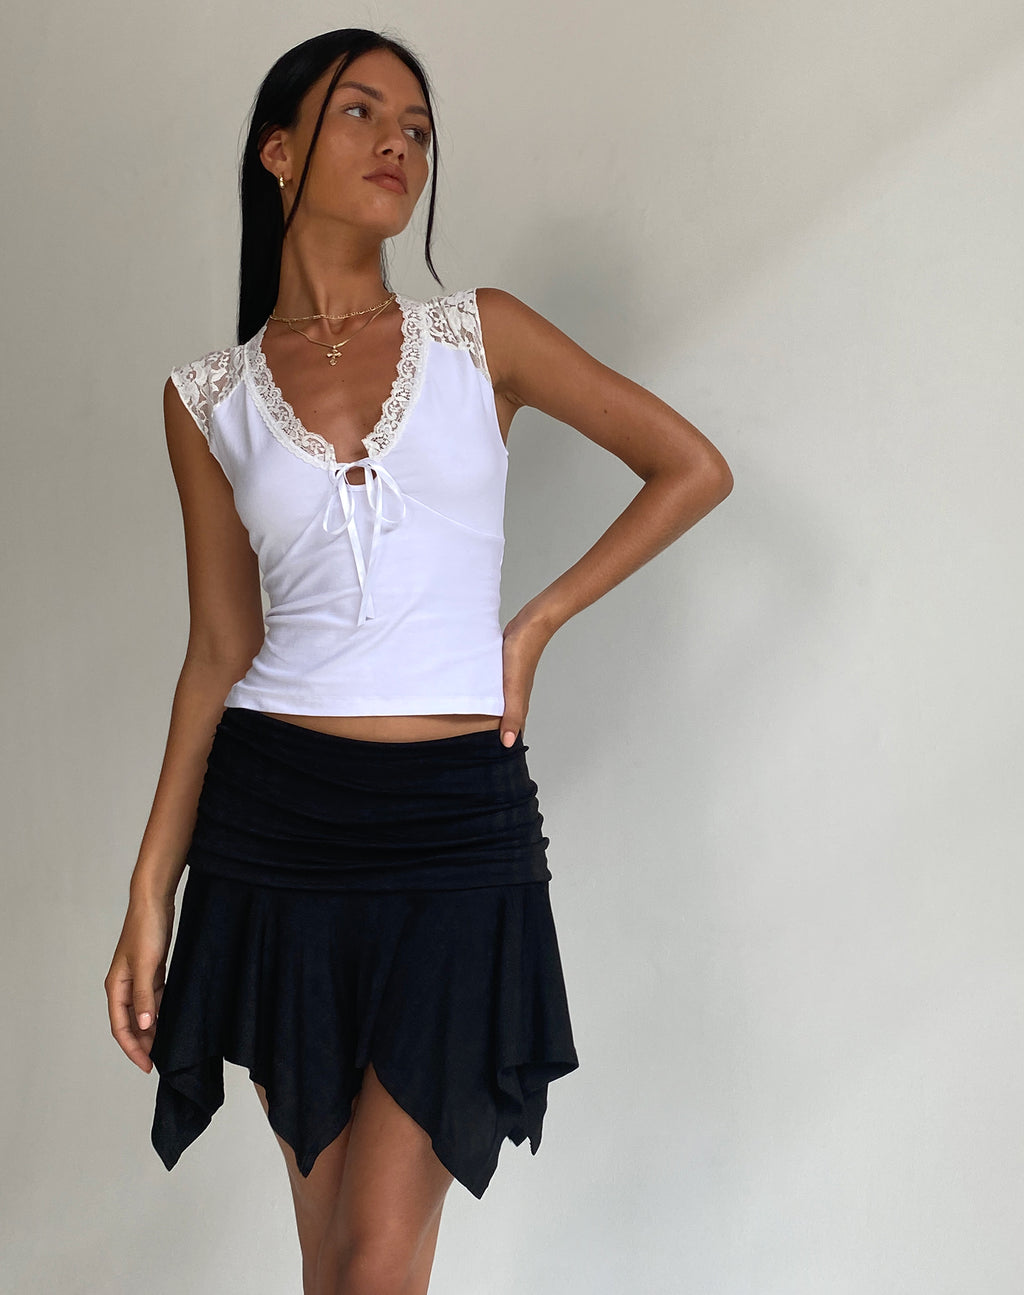 Livina Top in Jersey White Lace